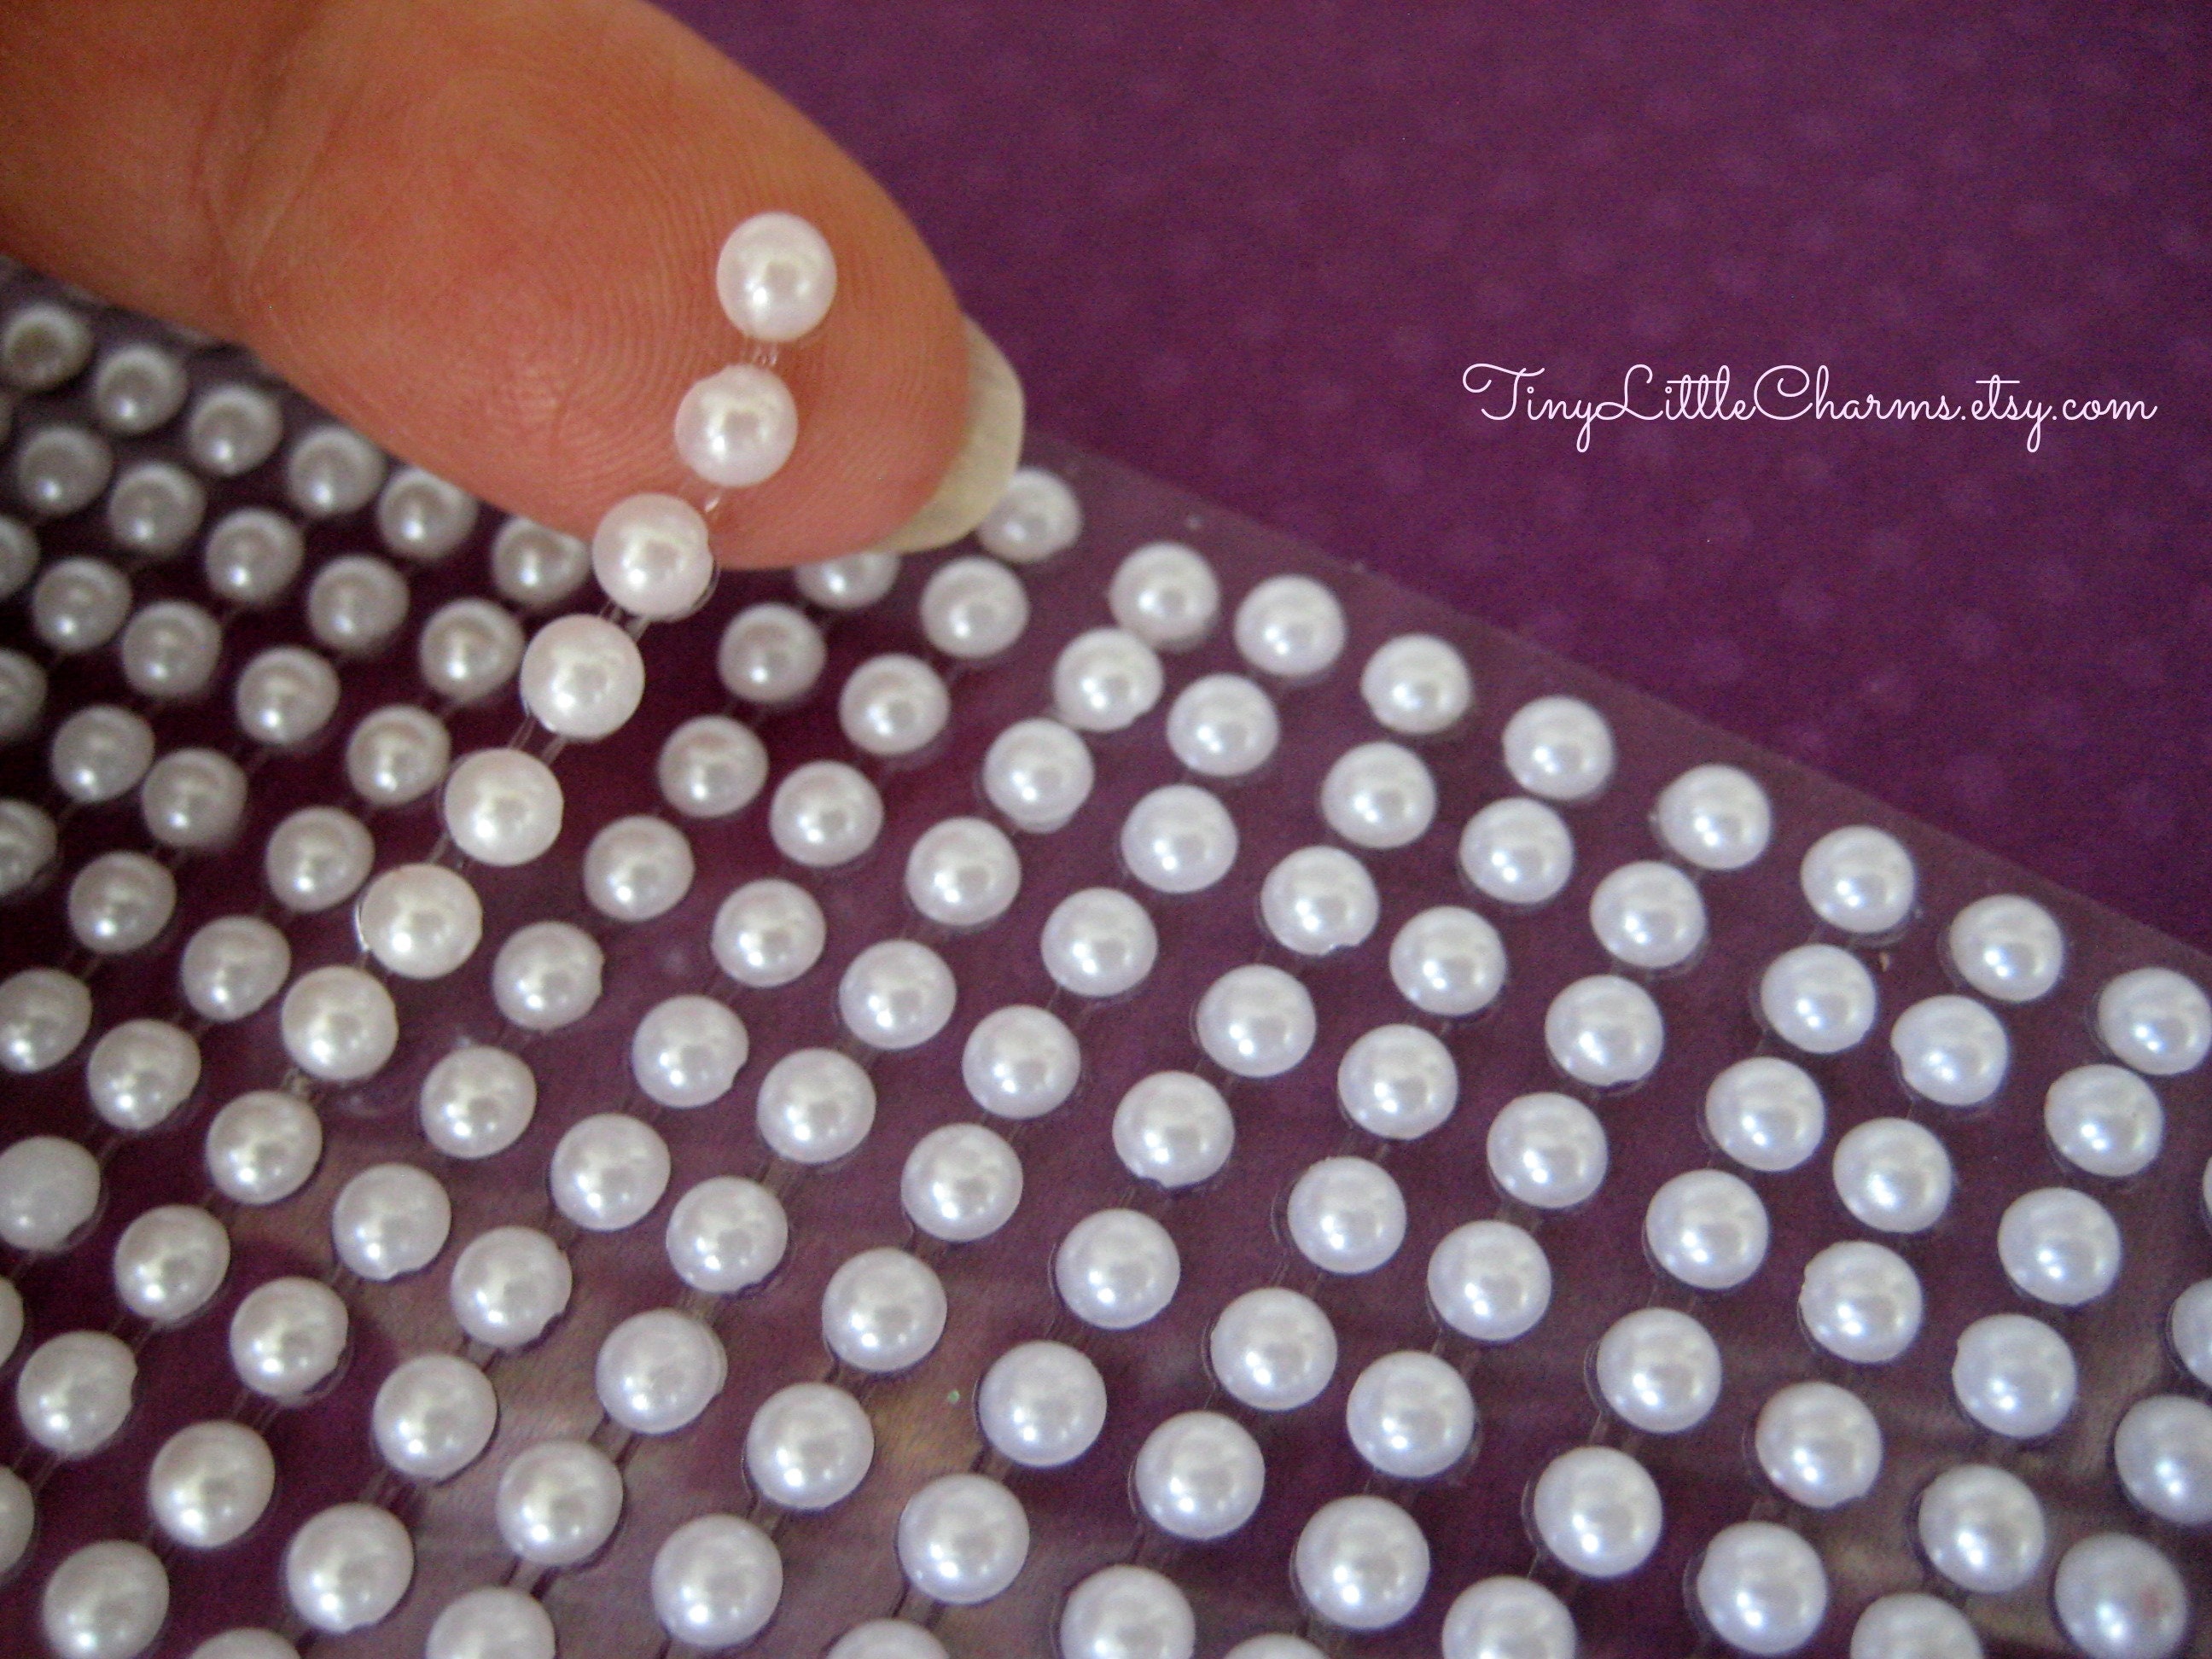  5900 Pcs Half Pearls for Crafts White Nail Pearls for